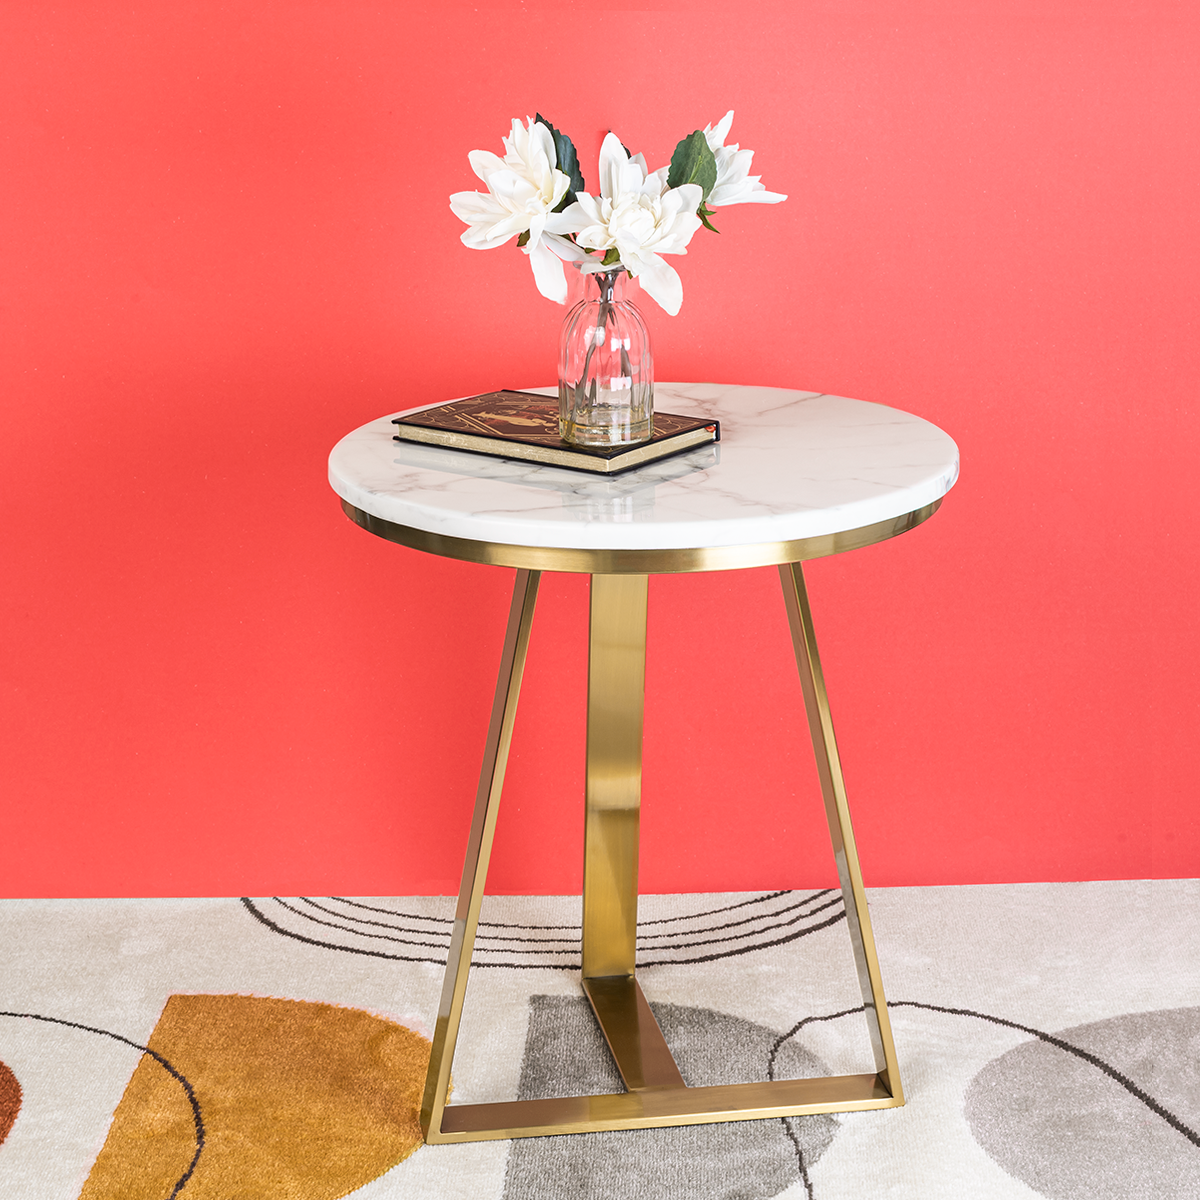 8 Latest Accent Table Designs That You Must know of! – Dekor Company